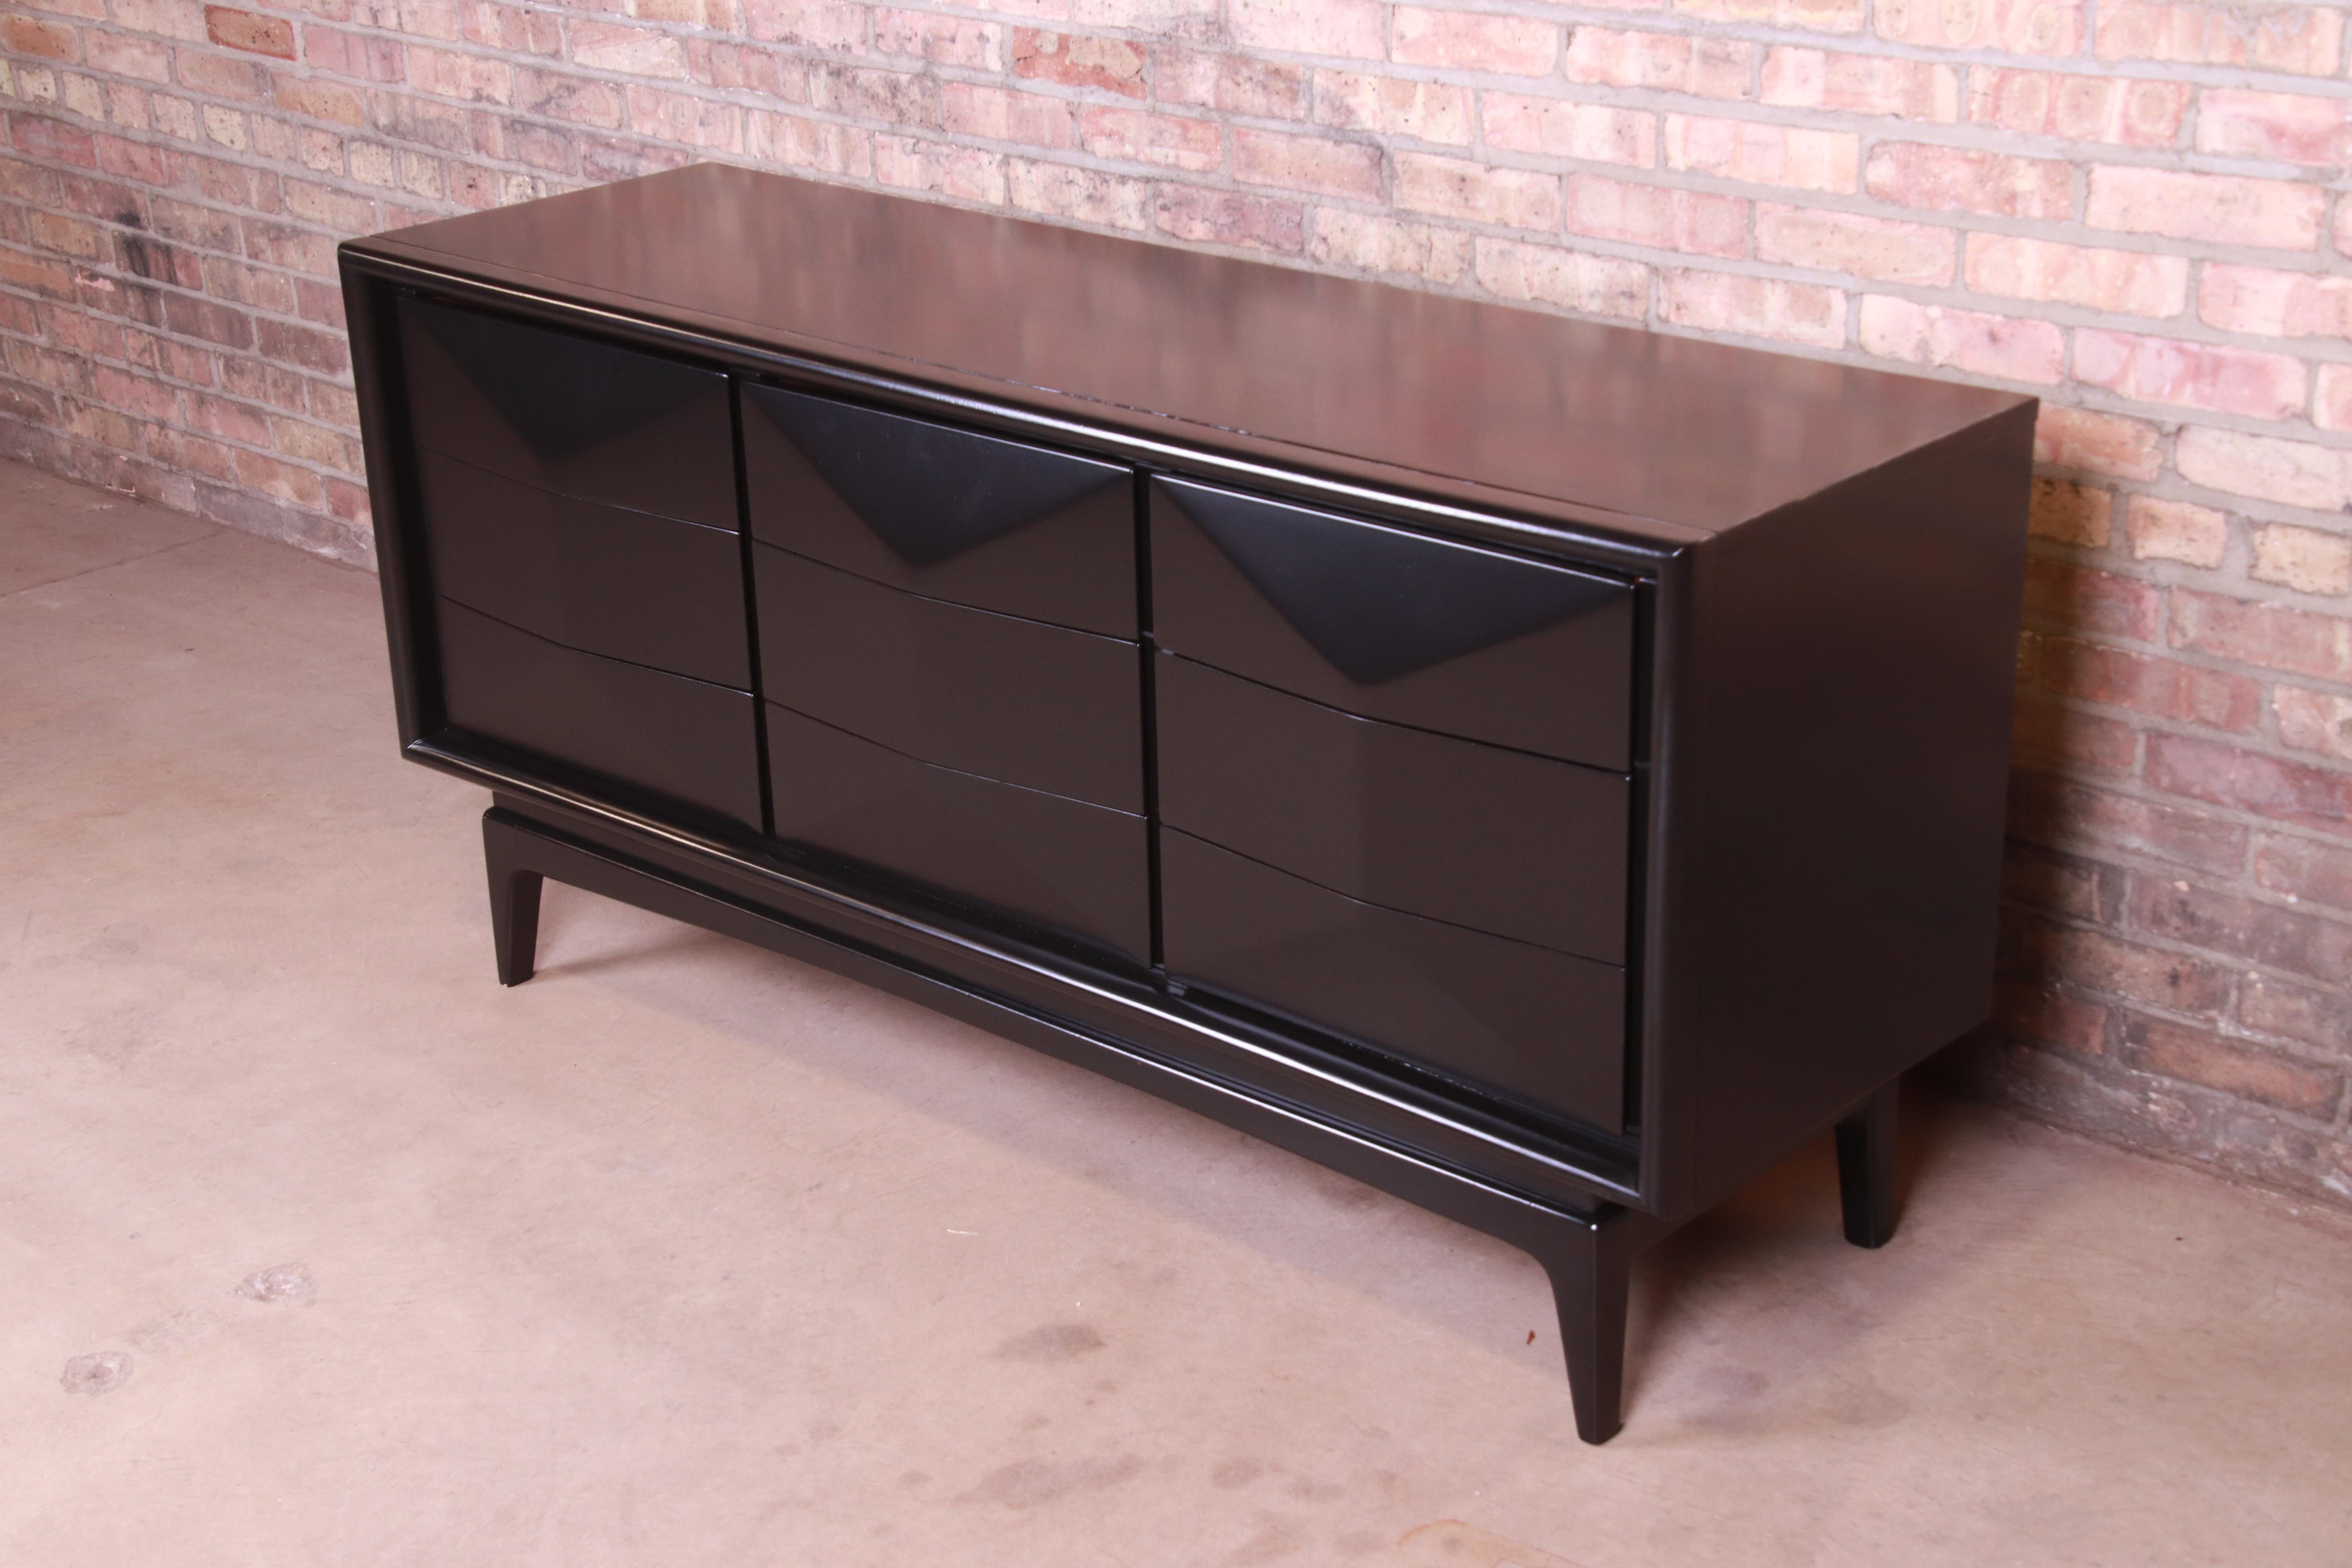 A stunning Mid-Century Modern sculpted walnut ebonized diamond front long dresser or credenza

In the manner of Vladimir Kagan

By United Furniture Co.

USA, 1960s

Measures: 62